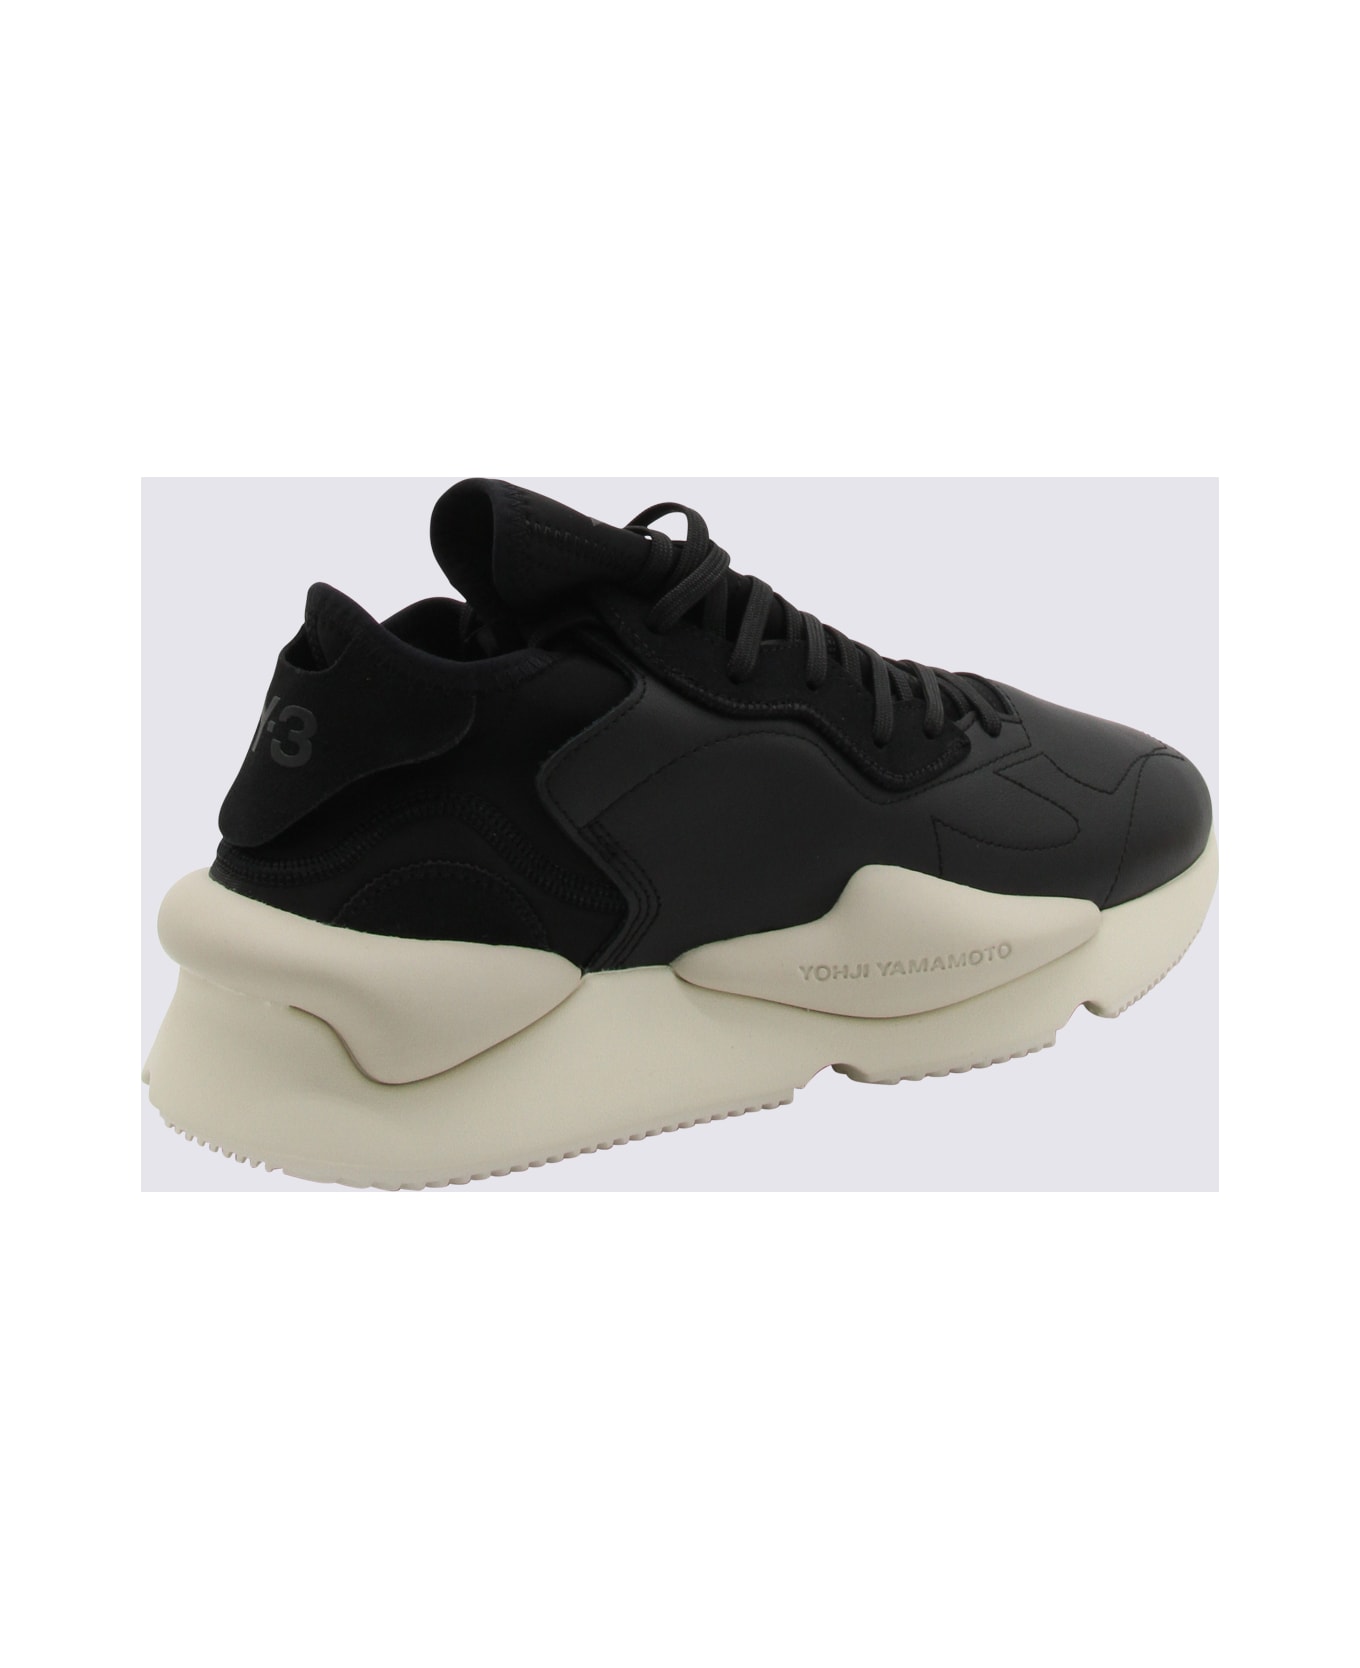 Y-3 Black And White Leather Kaiwa Sneakers - BLACK/OFF WHITE/CLEAR BROWN